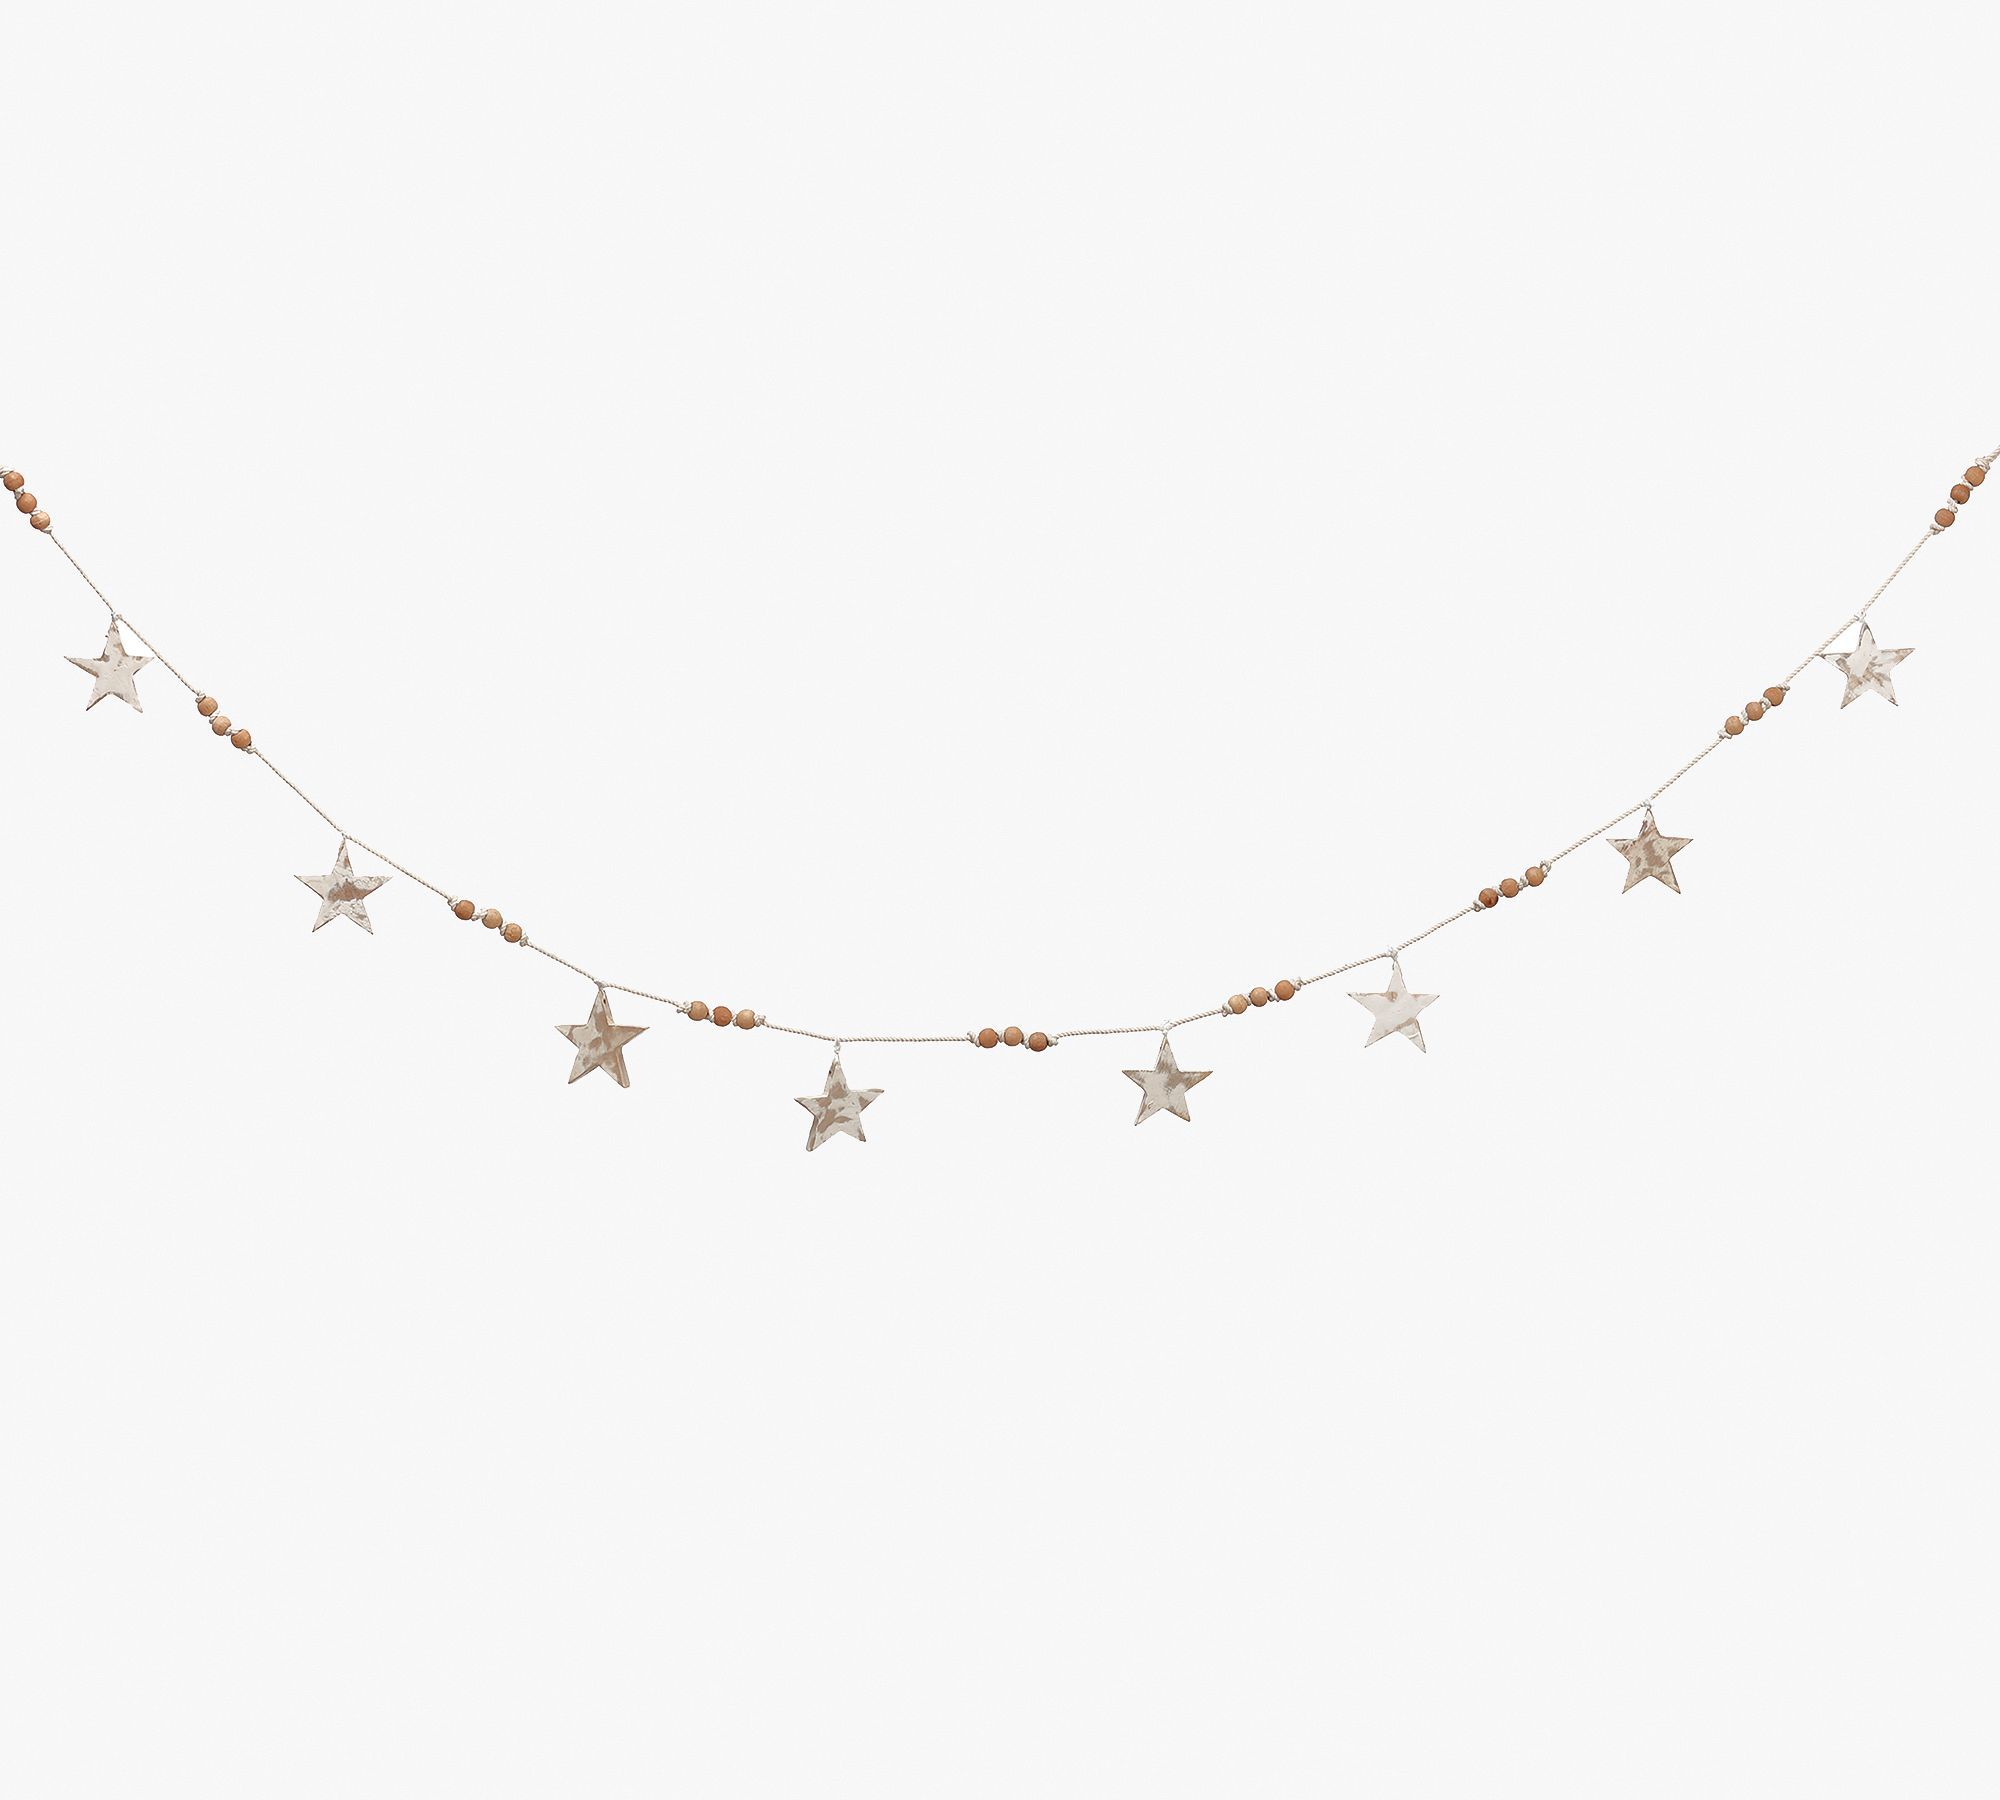 Wooden Star Garlands - Set of 2 | Pottery Barn (US)